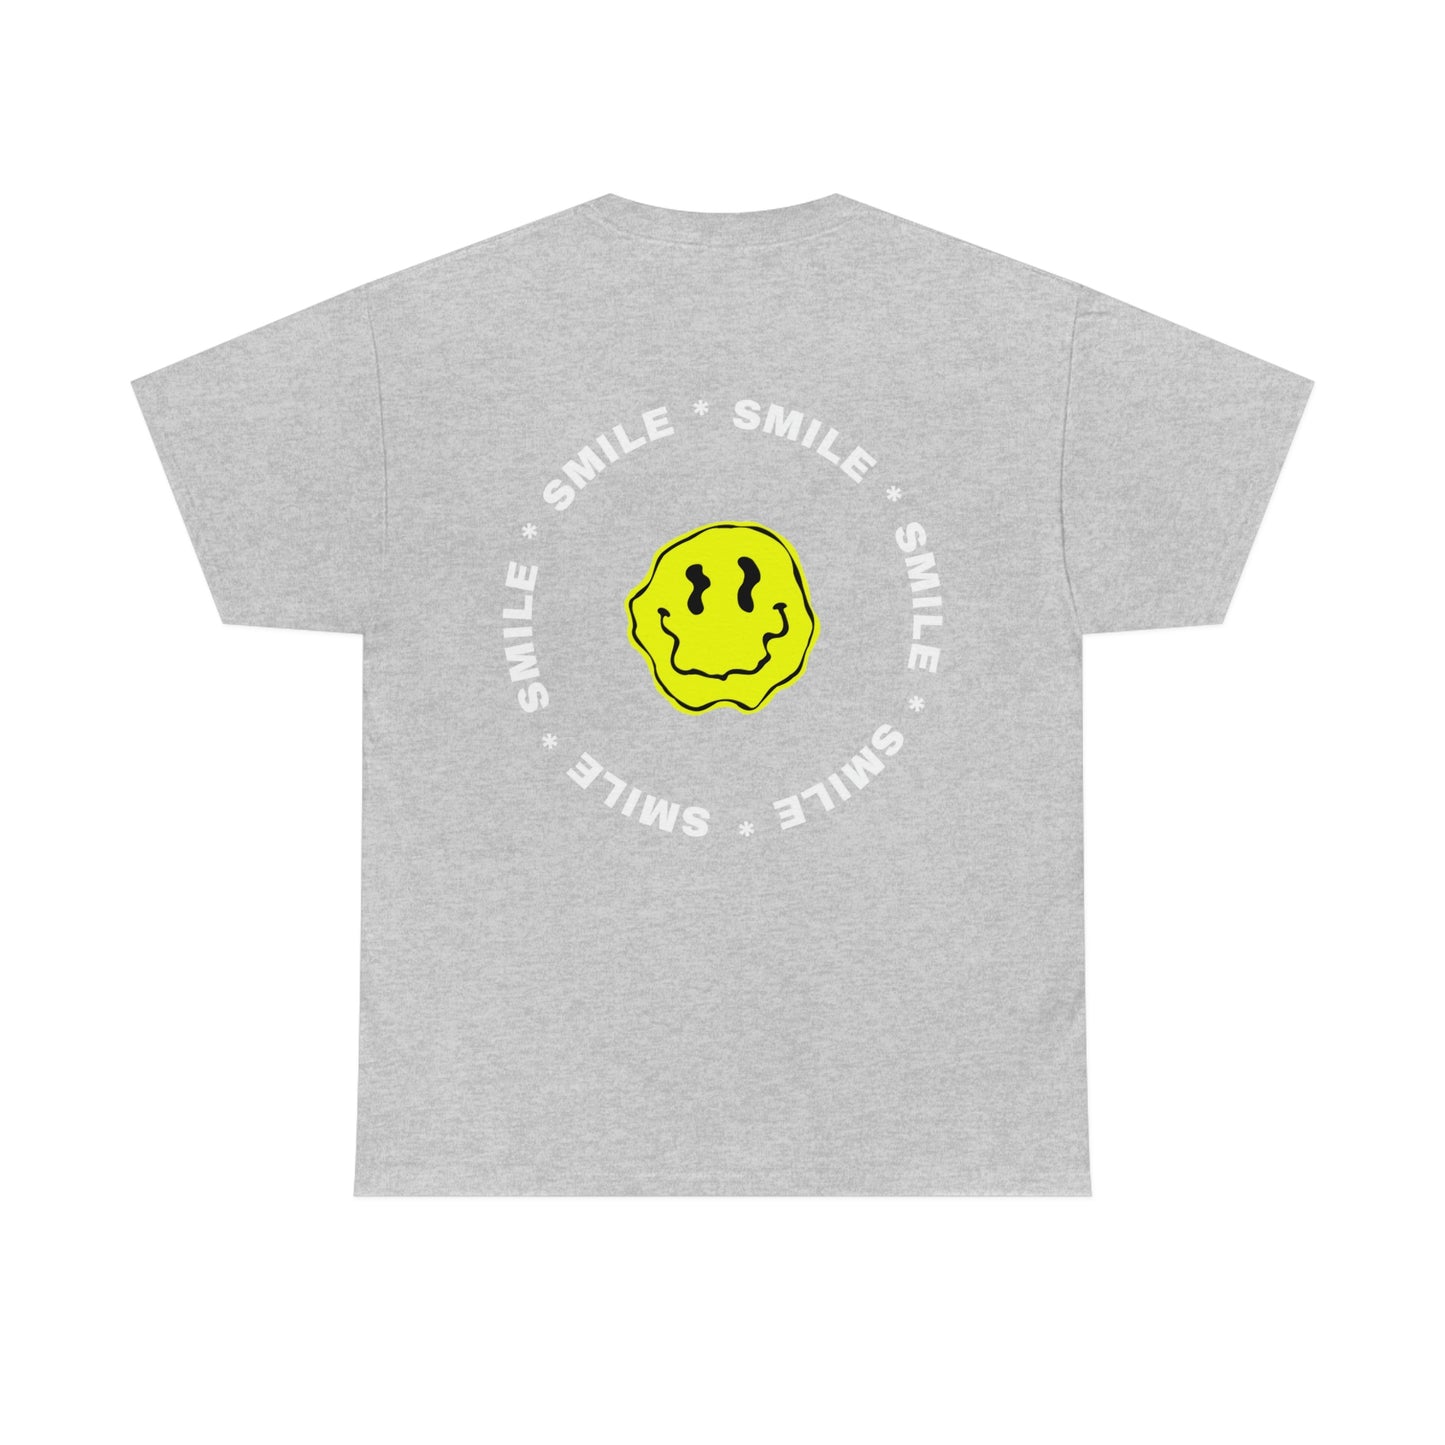 The King Smile T-Shirt